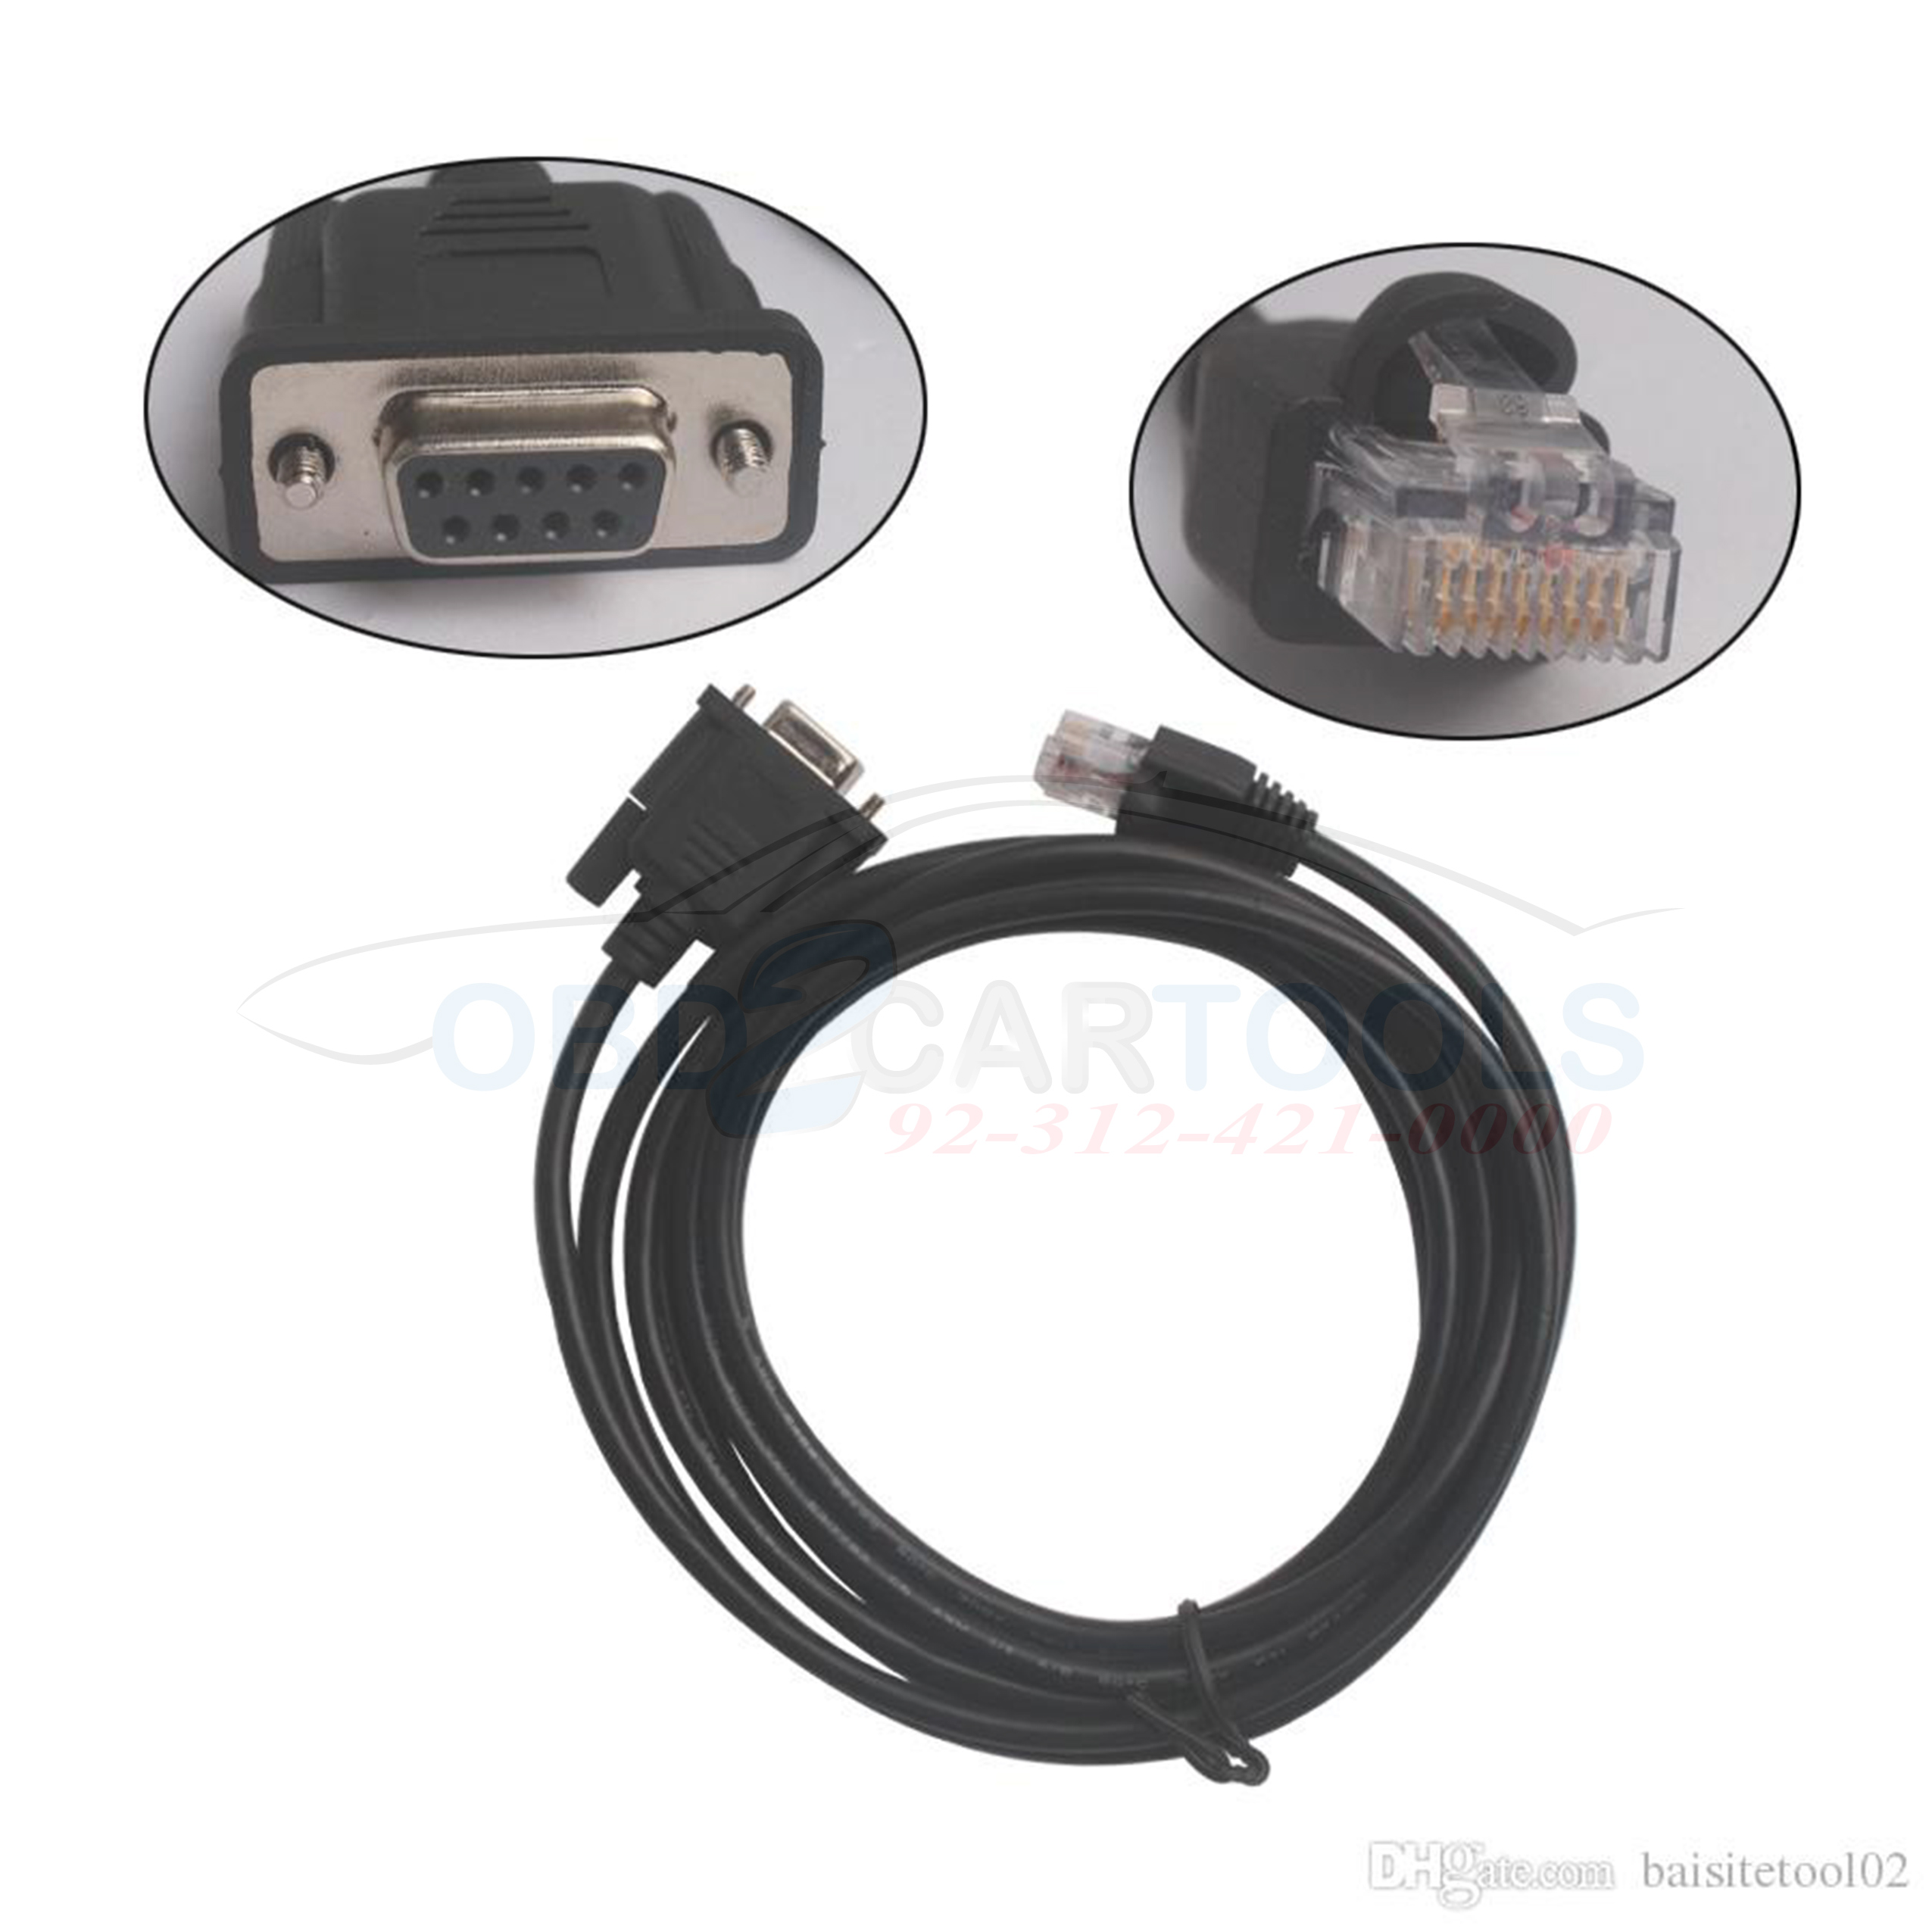 Product image for HDS HIM SERIAL CABLE  FOR MAIN DEVICE